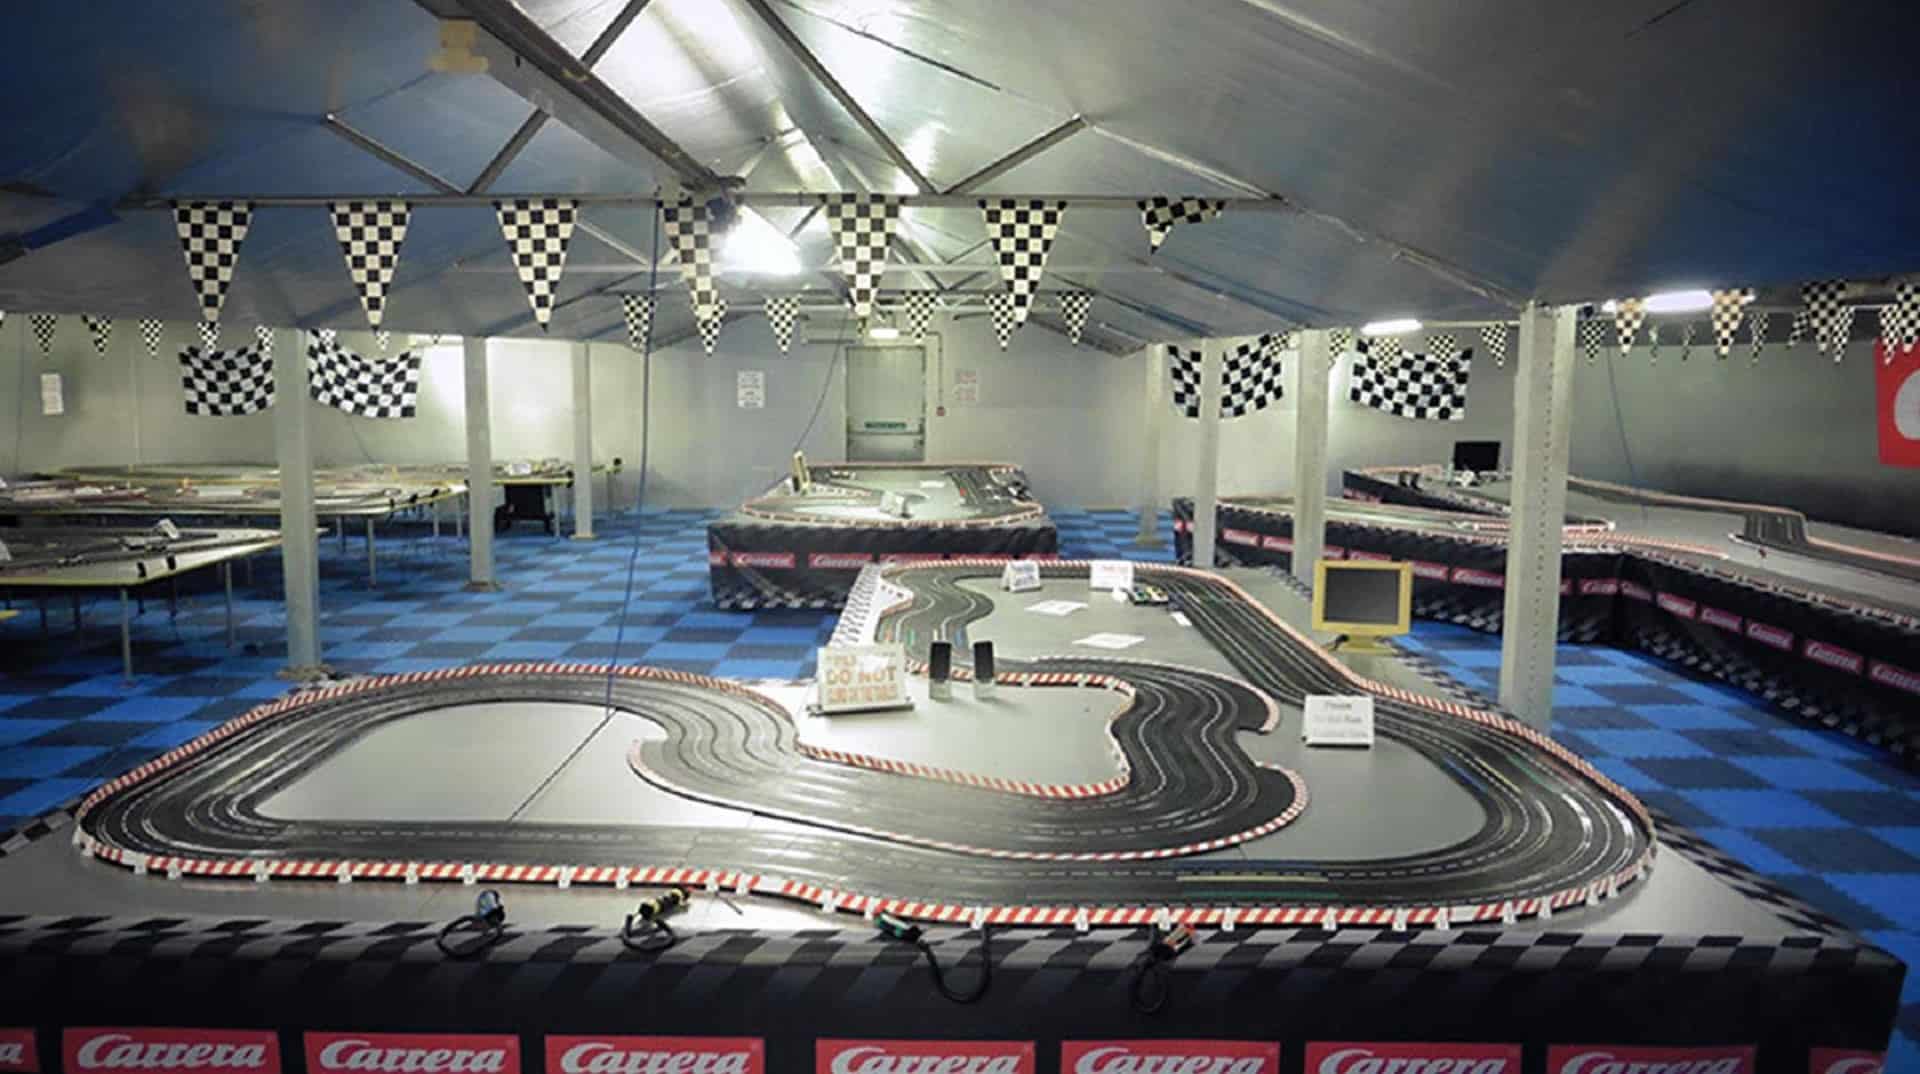 Scalextric Racing in UK